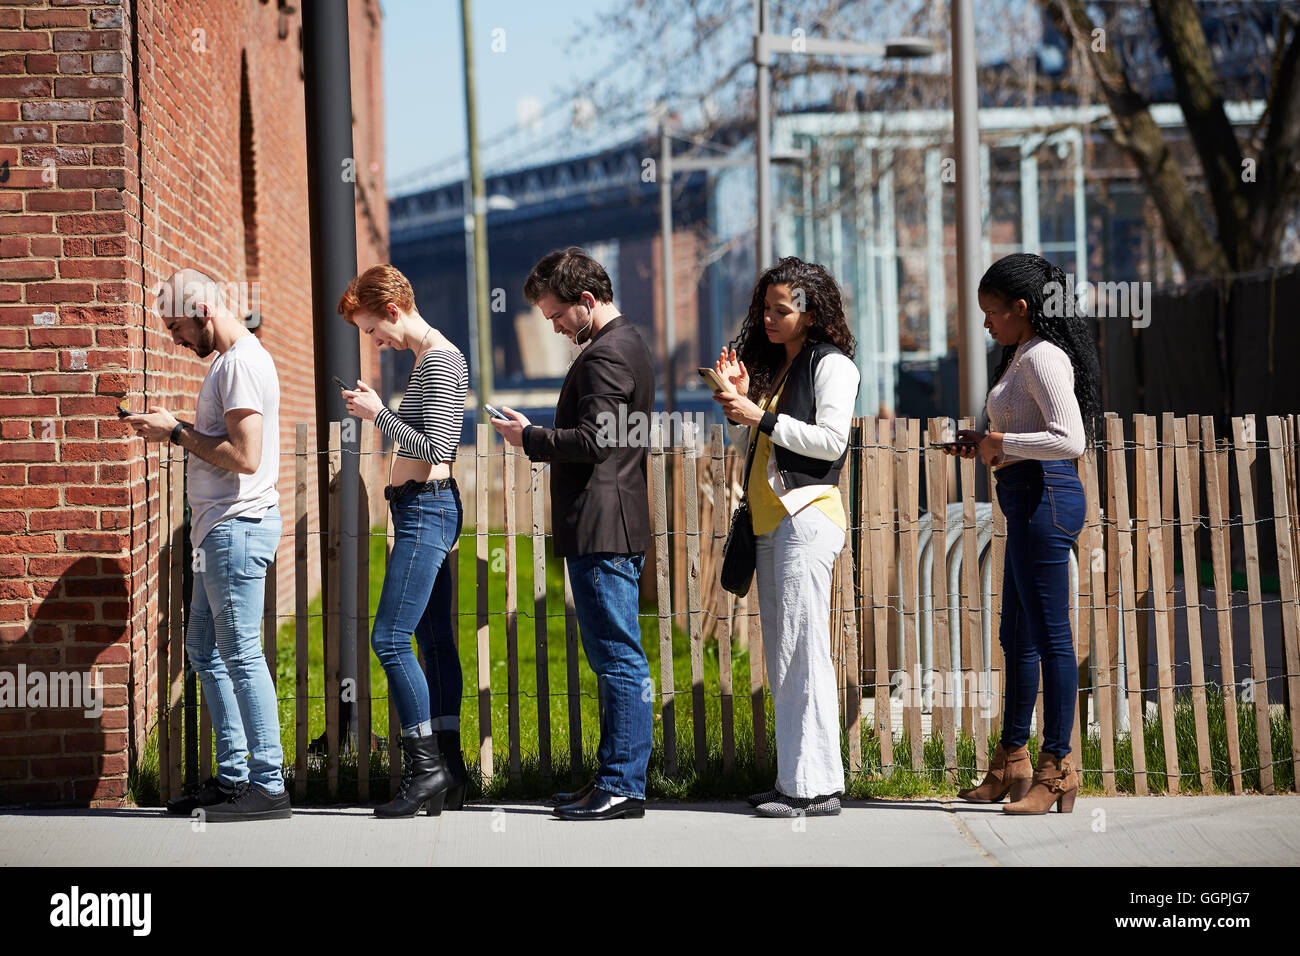 People in line on sidewalk using cell phones Stock Photo